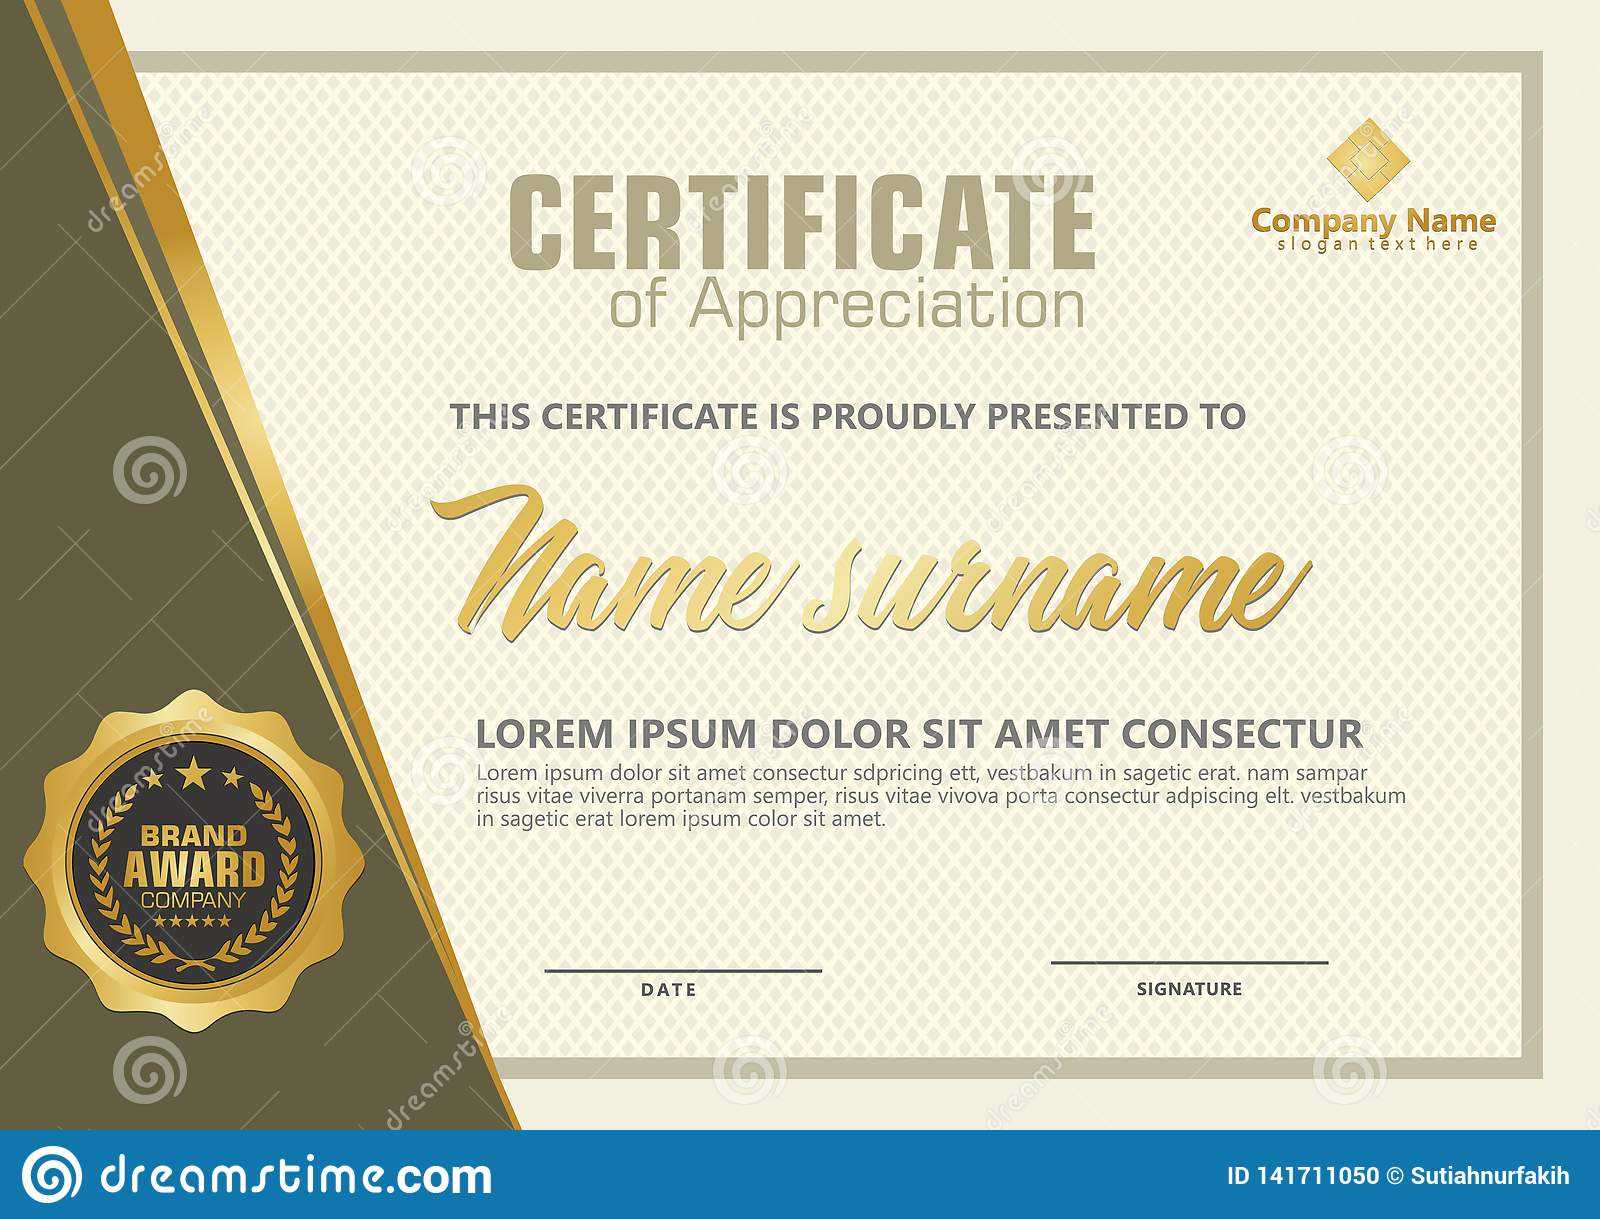 Elegant Certificate Template Vector With Luxury And Modern Regarding Elegant Certificate Templates Free